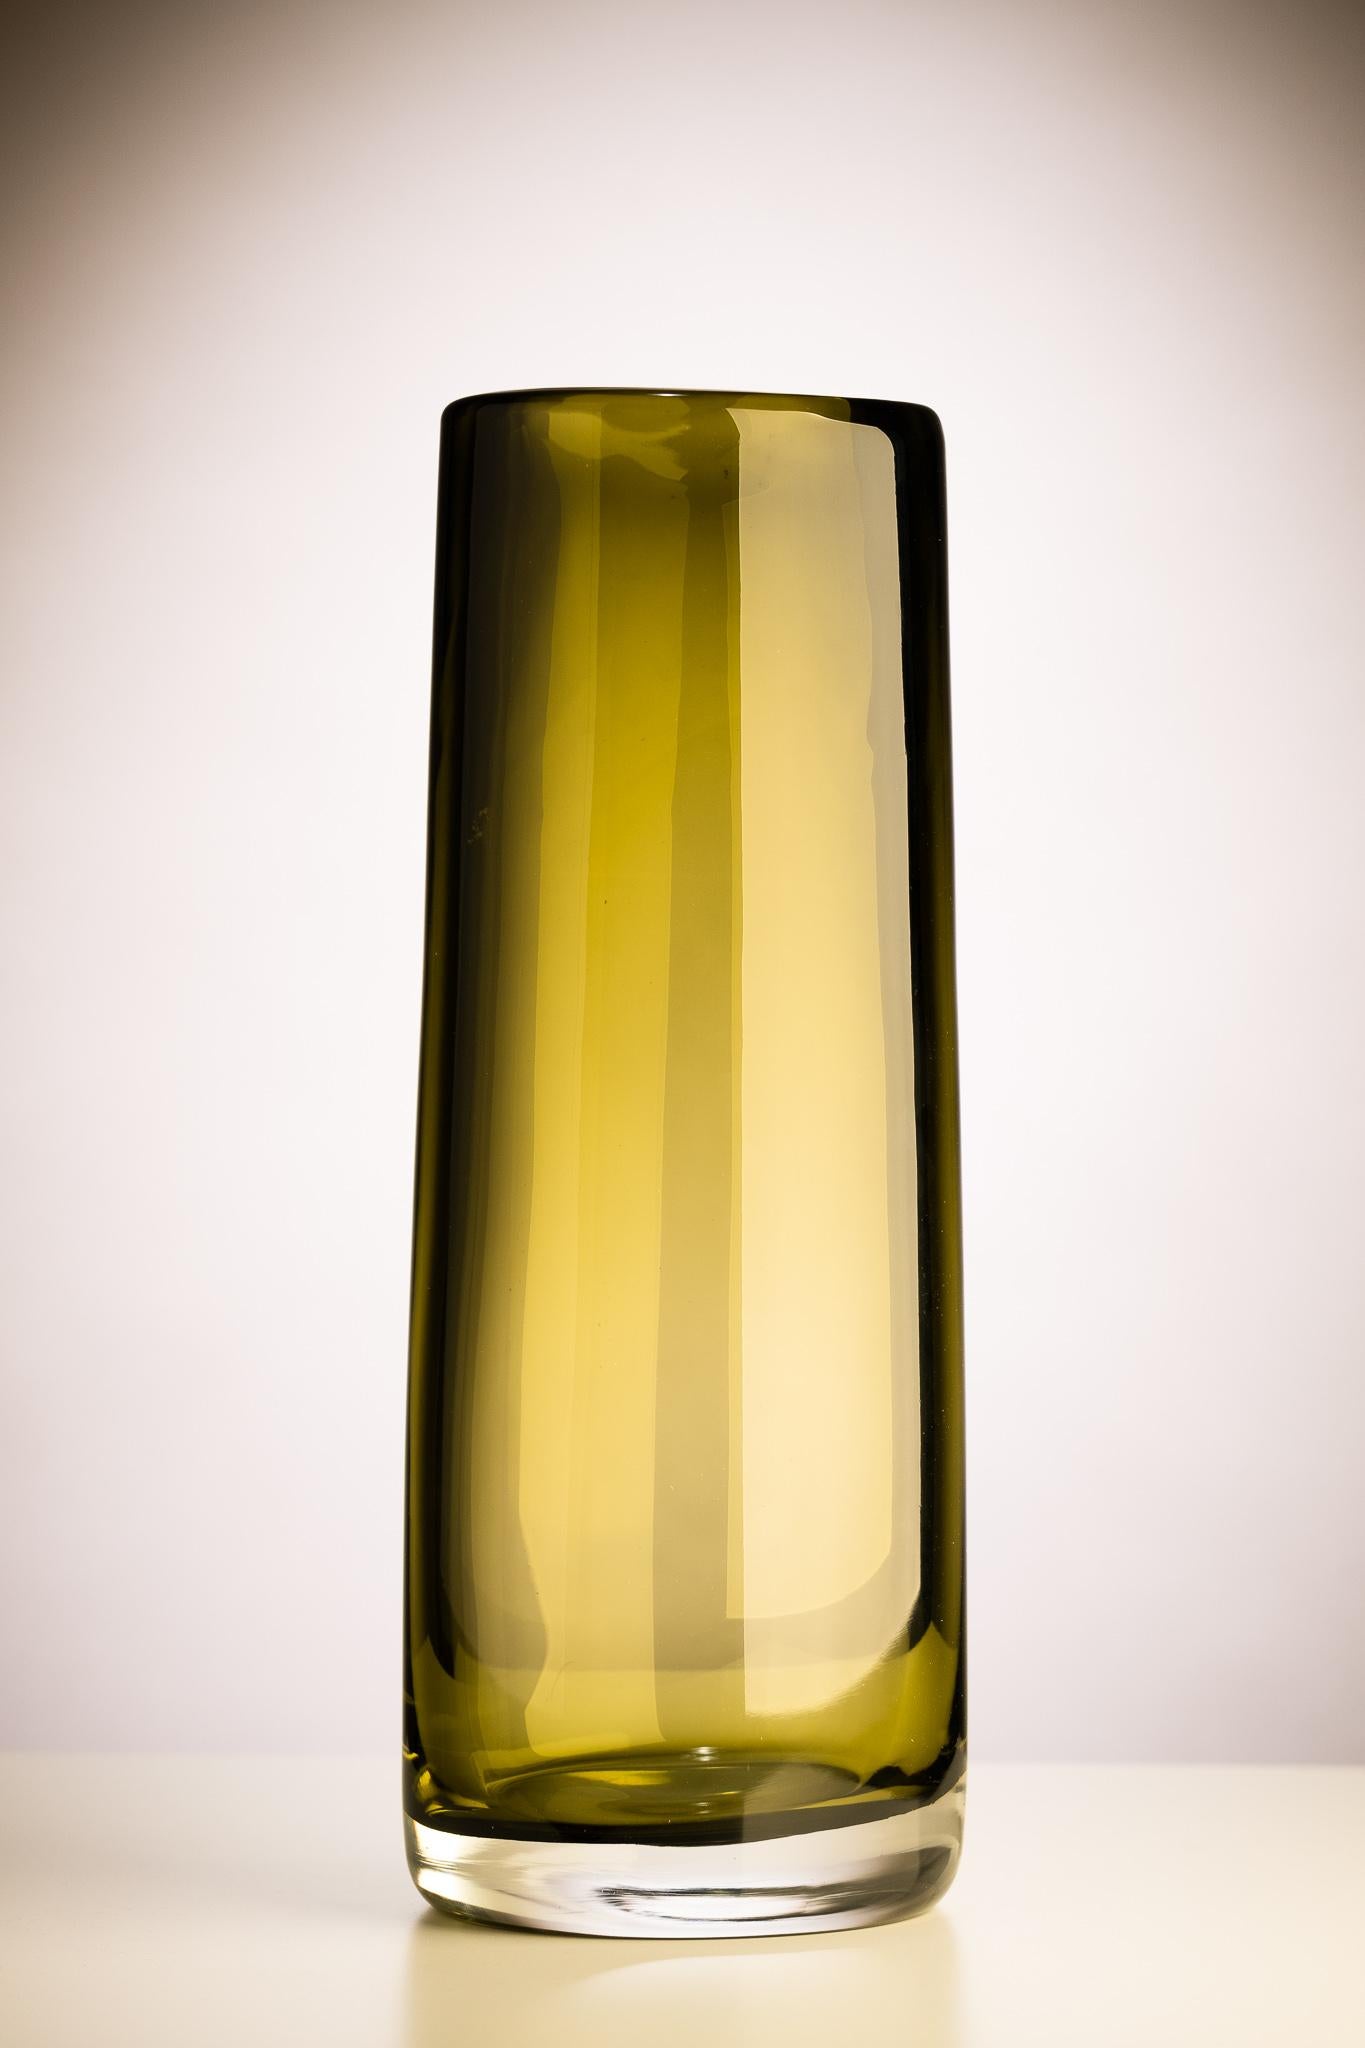 Cilindro Large Glossy - Transparent Vase, Murano glass, by Federico Peri, 21st century.
Cilindro is a vase from the Essentials collection designed by Federico Peri for Purho in spring 2021.
Created from the starting-point of an oval and conical